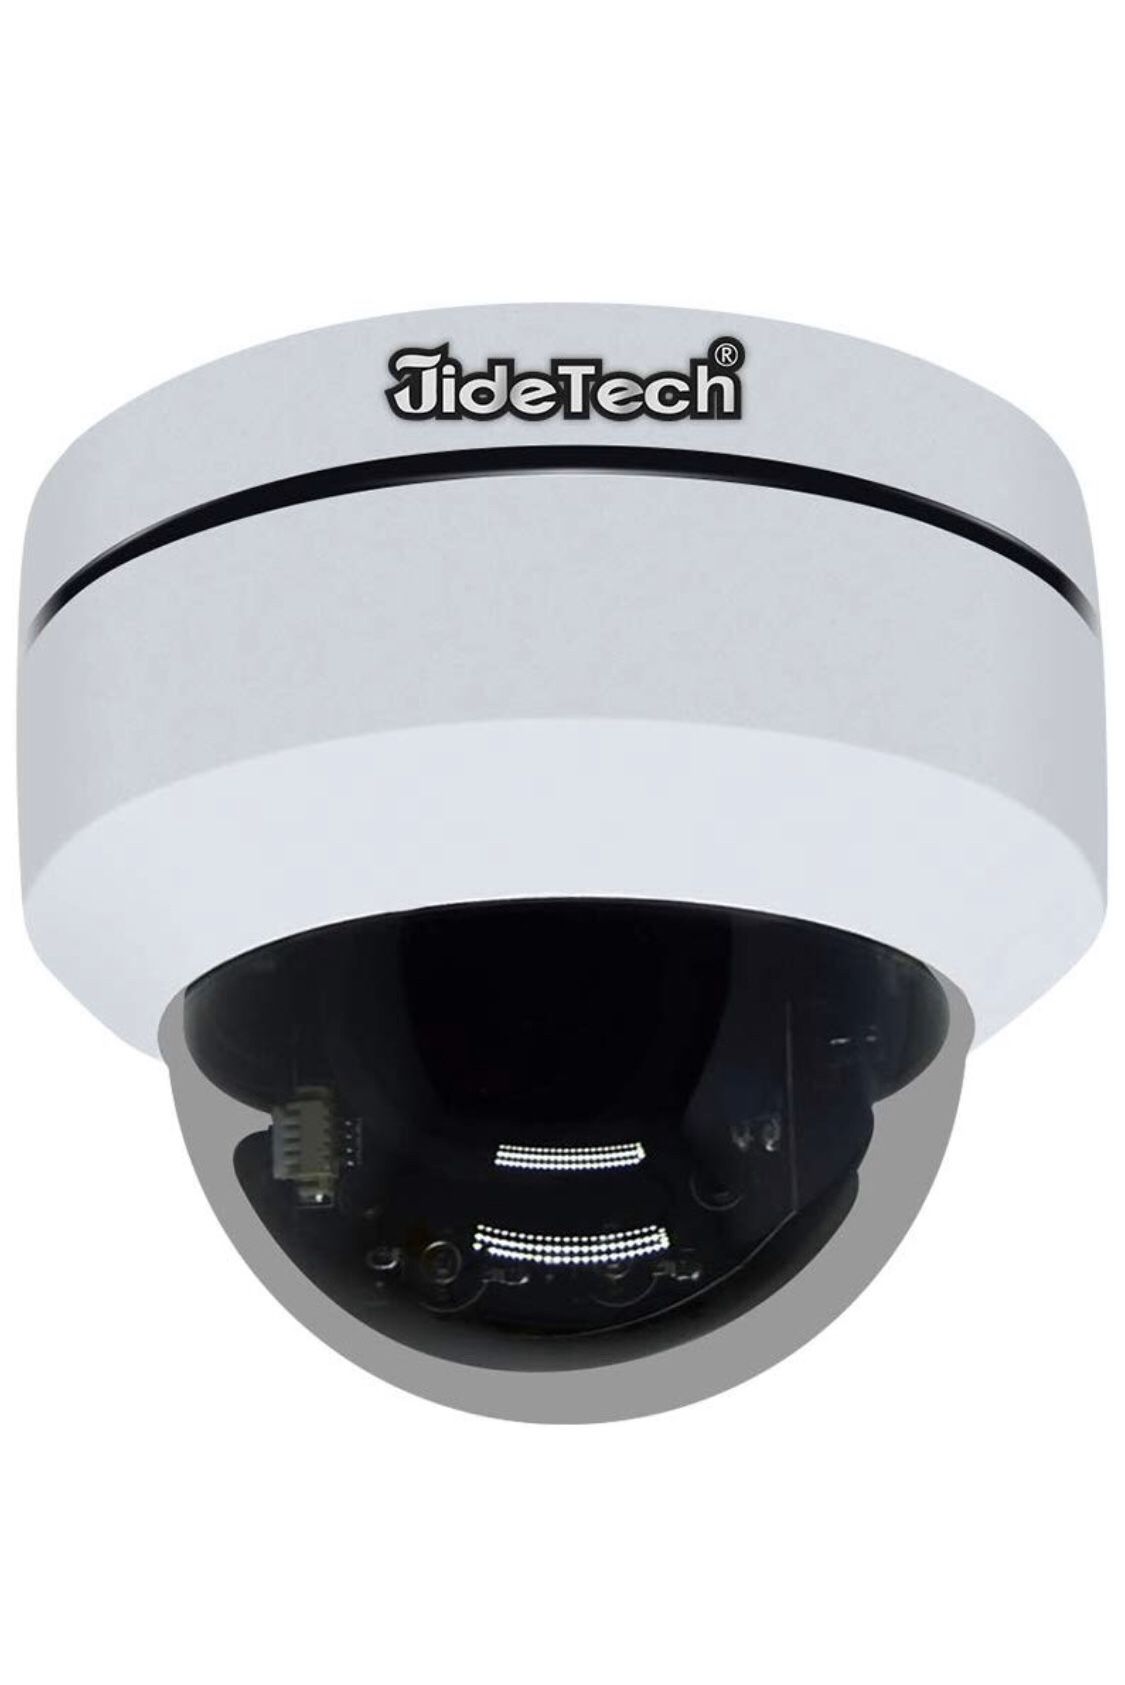 NEW!! HD 1080P PTZ Outdoor POE Security IP Dome Camera with 4X Optical Zoom Pan/Tilt/4X Motorized Zoom, Dome Style for Ceiling Installation